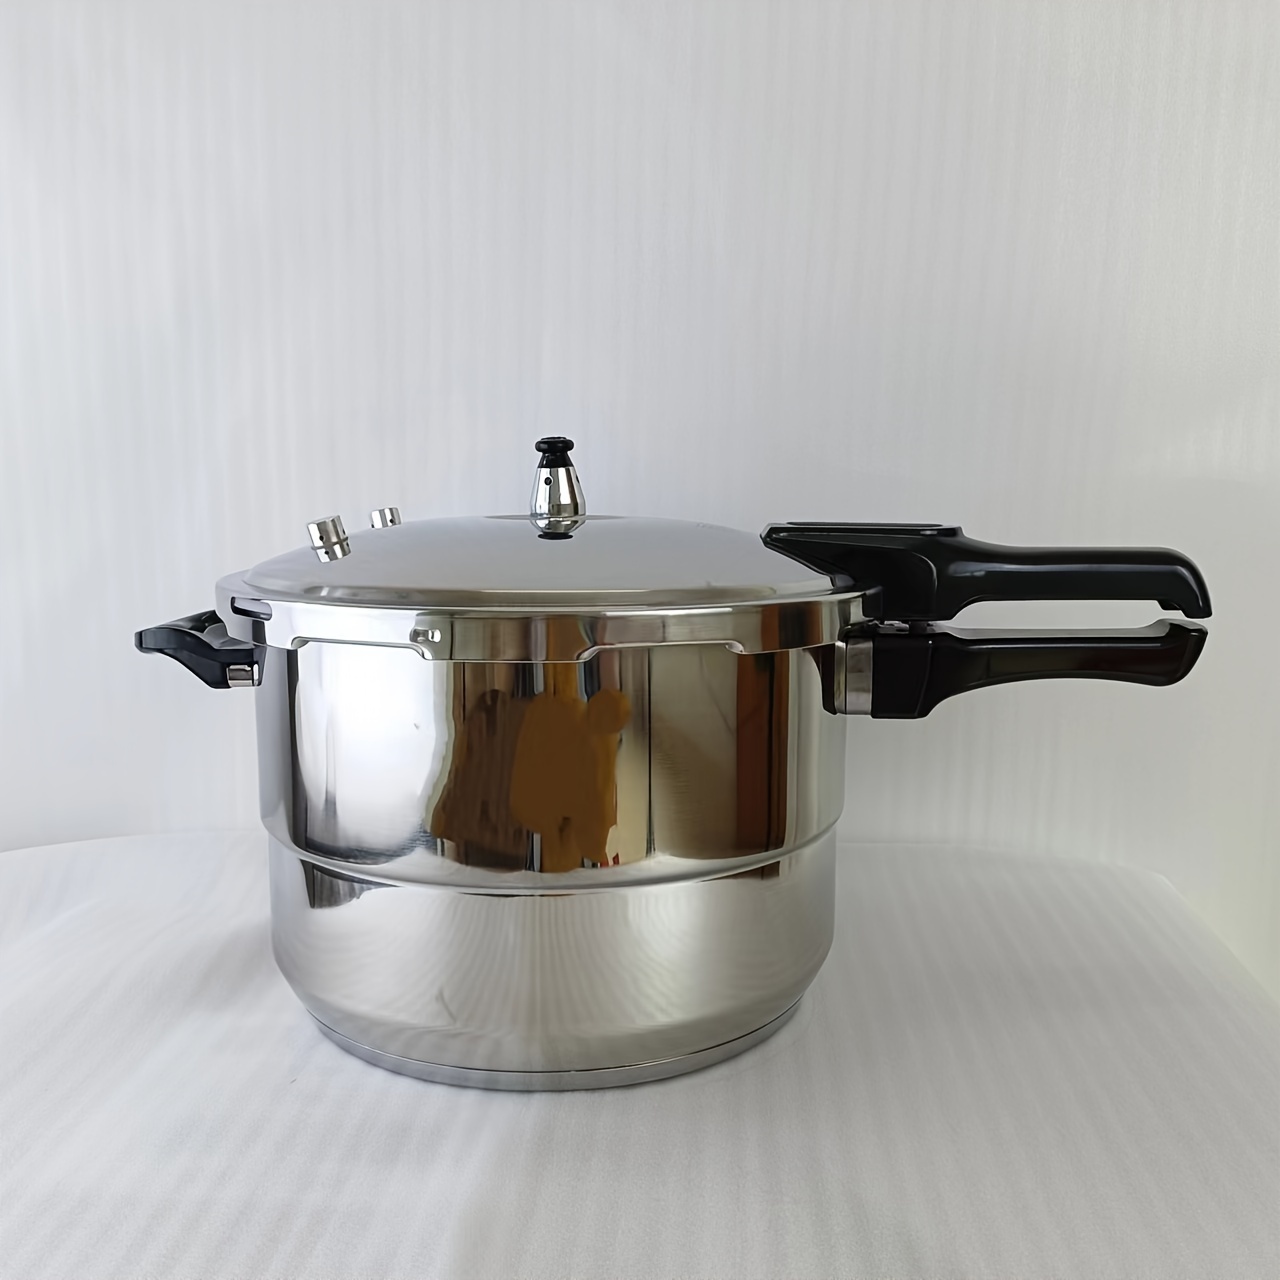 Kitchen Novel Stainless Steel Food Steamer Basket with Silicone Handle Feet  Rice Pressure Cooker Steaming Grid